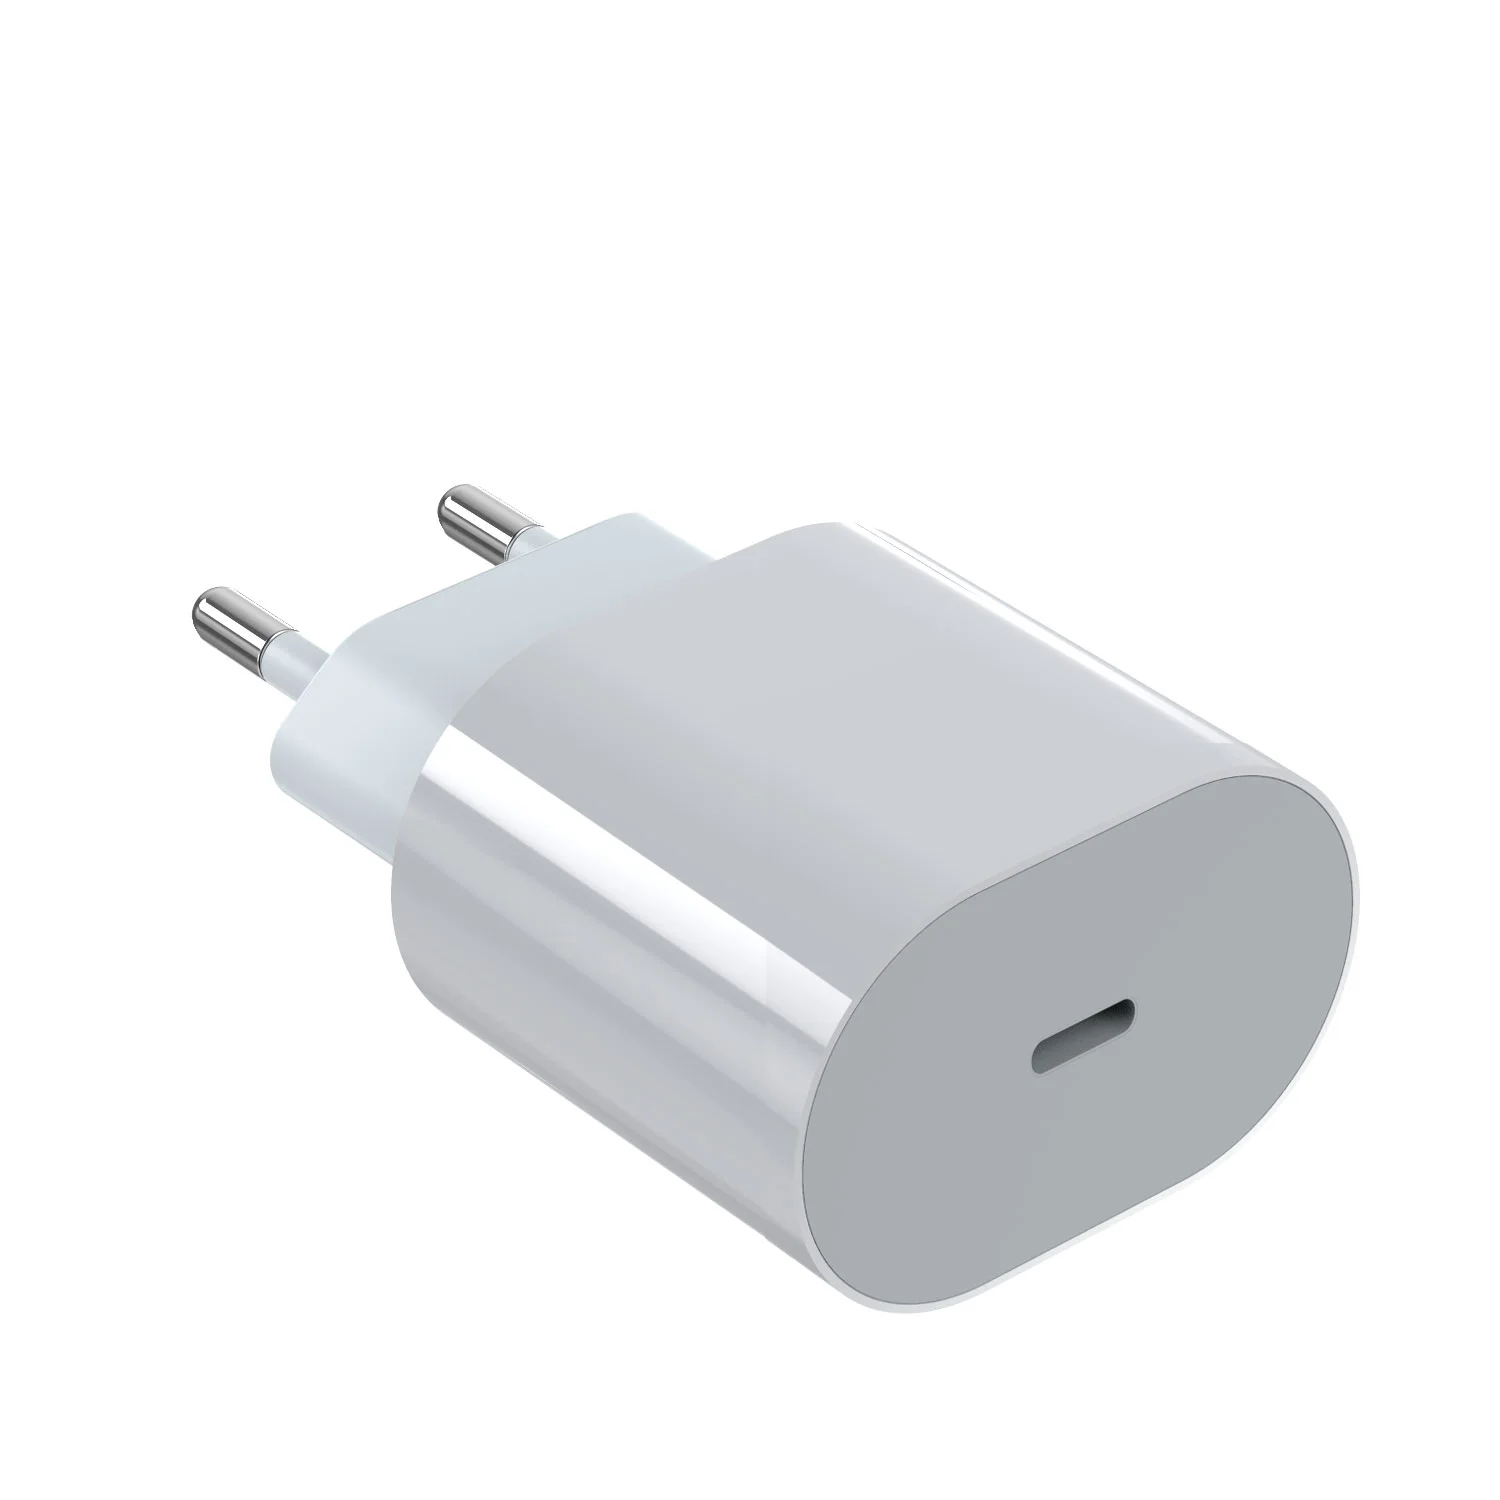 

2021 New Arrival Quick Charging PD Type C 20w 18 Watt Adapter EU Fast Charger for iPhone Max 11